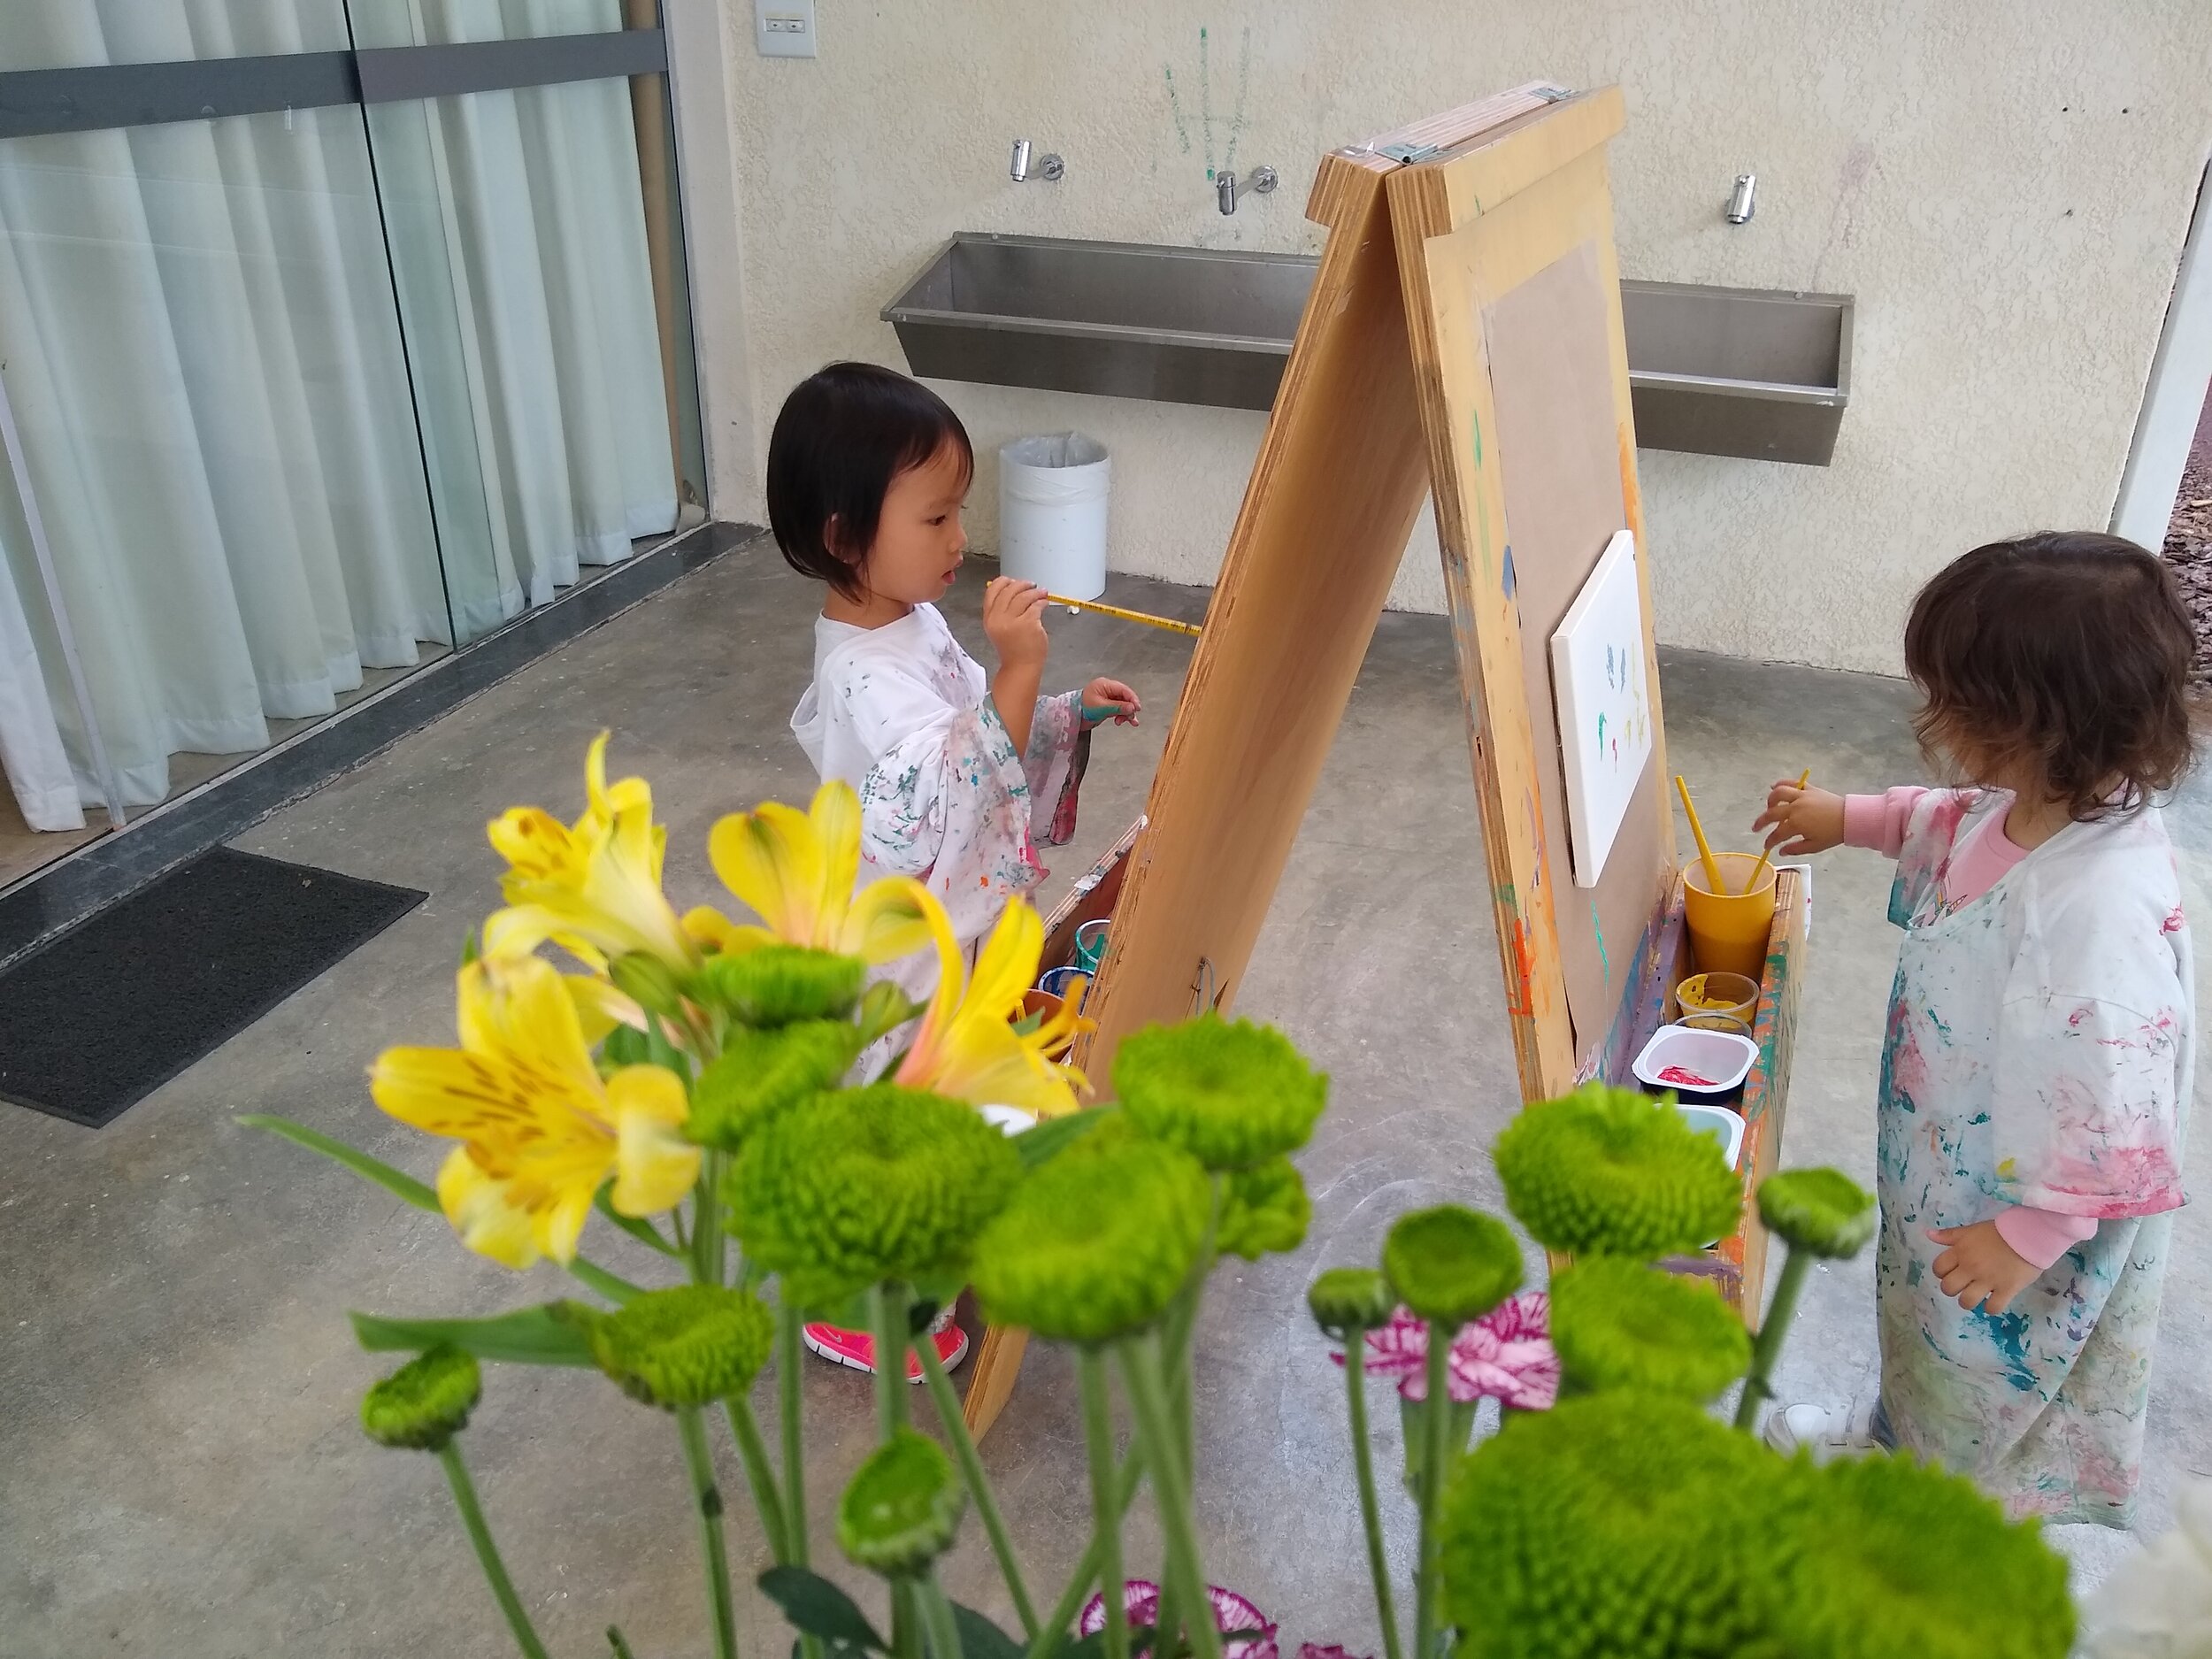 Two preschool students painting with an easel. They wear adult T-shirts, which cover the entire body, instead of the apron.